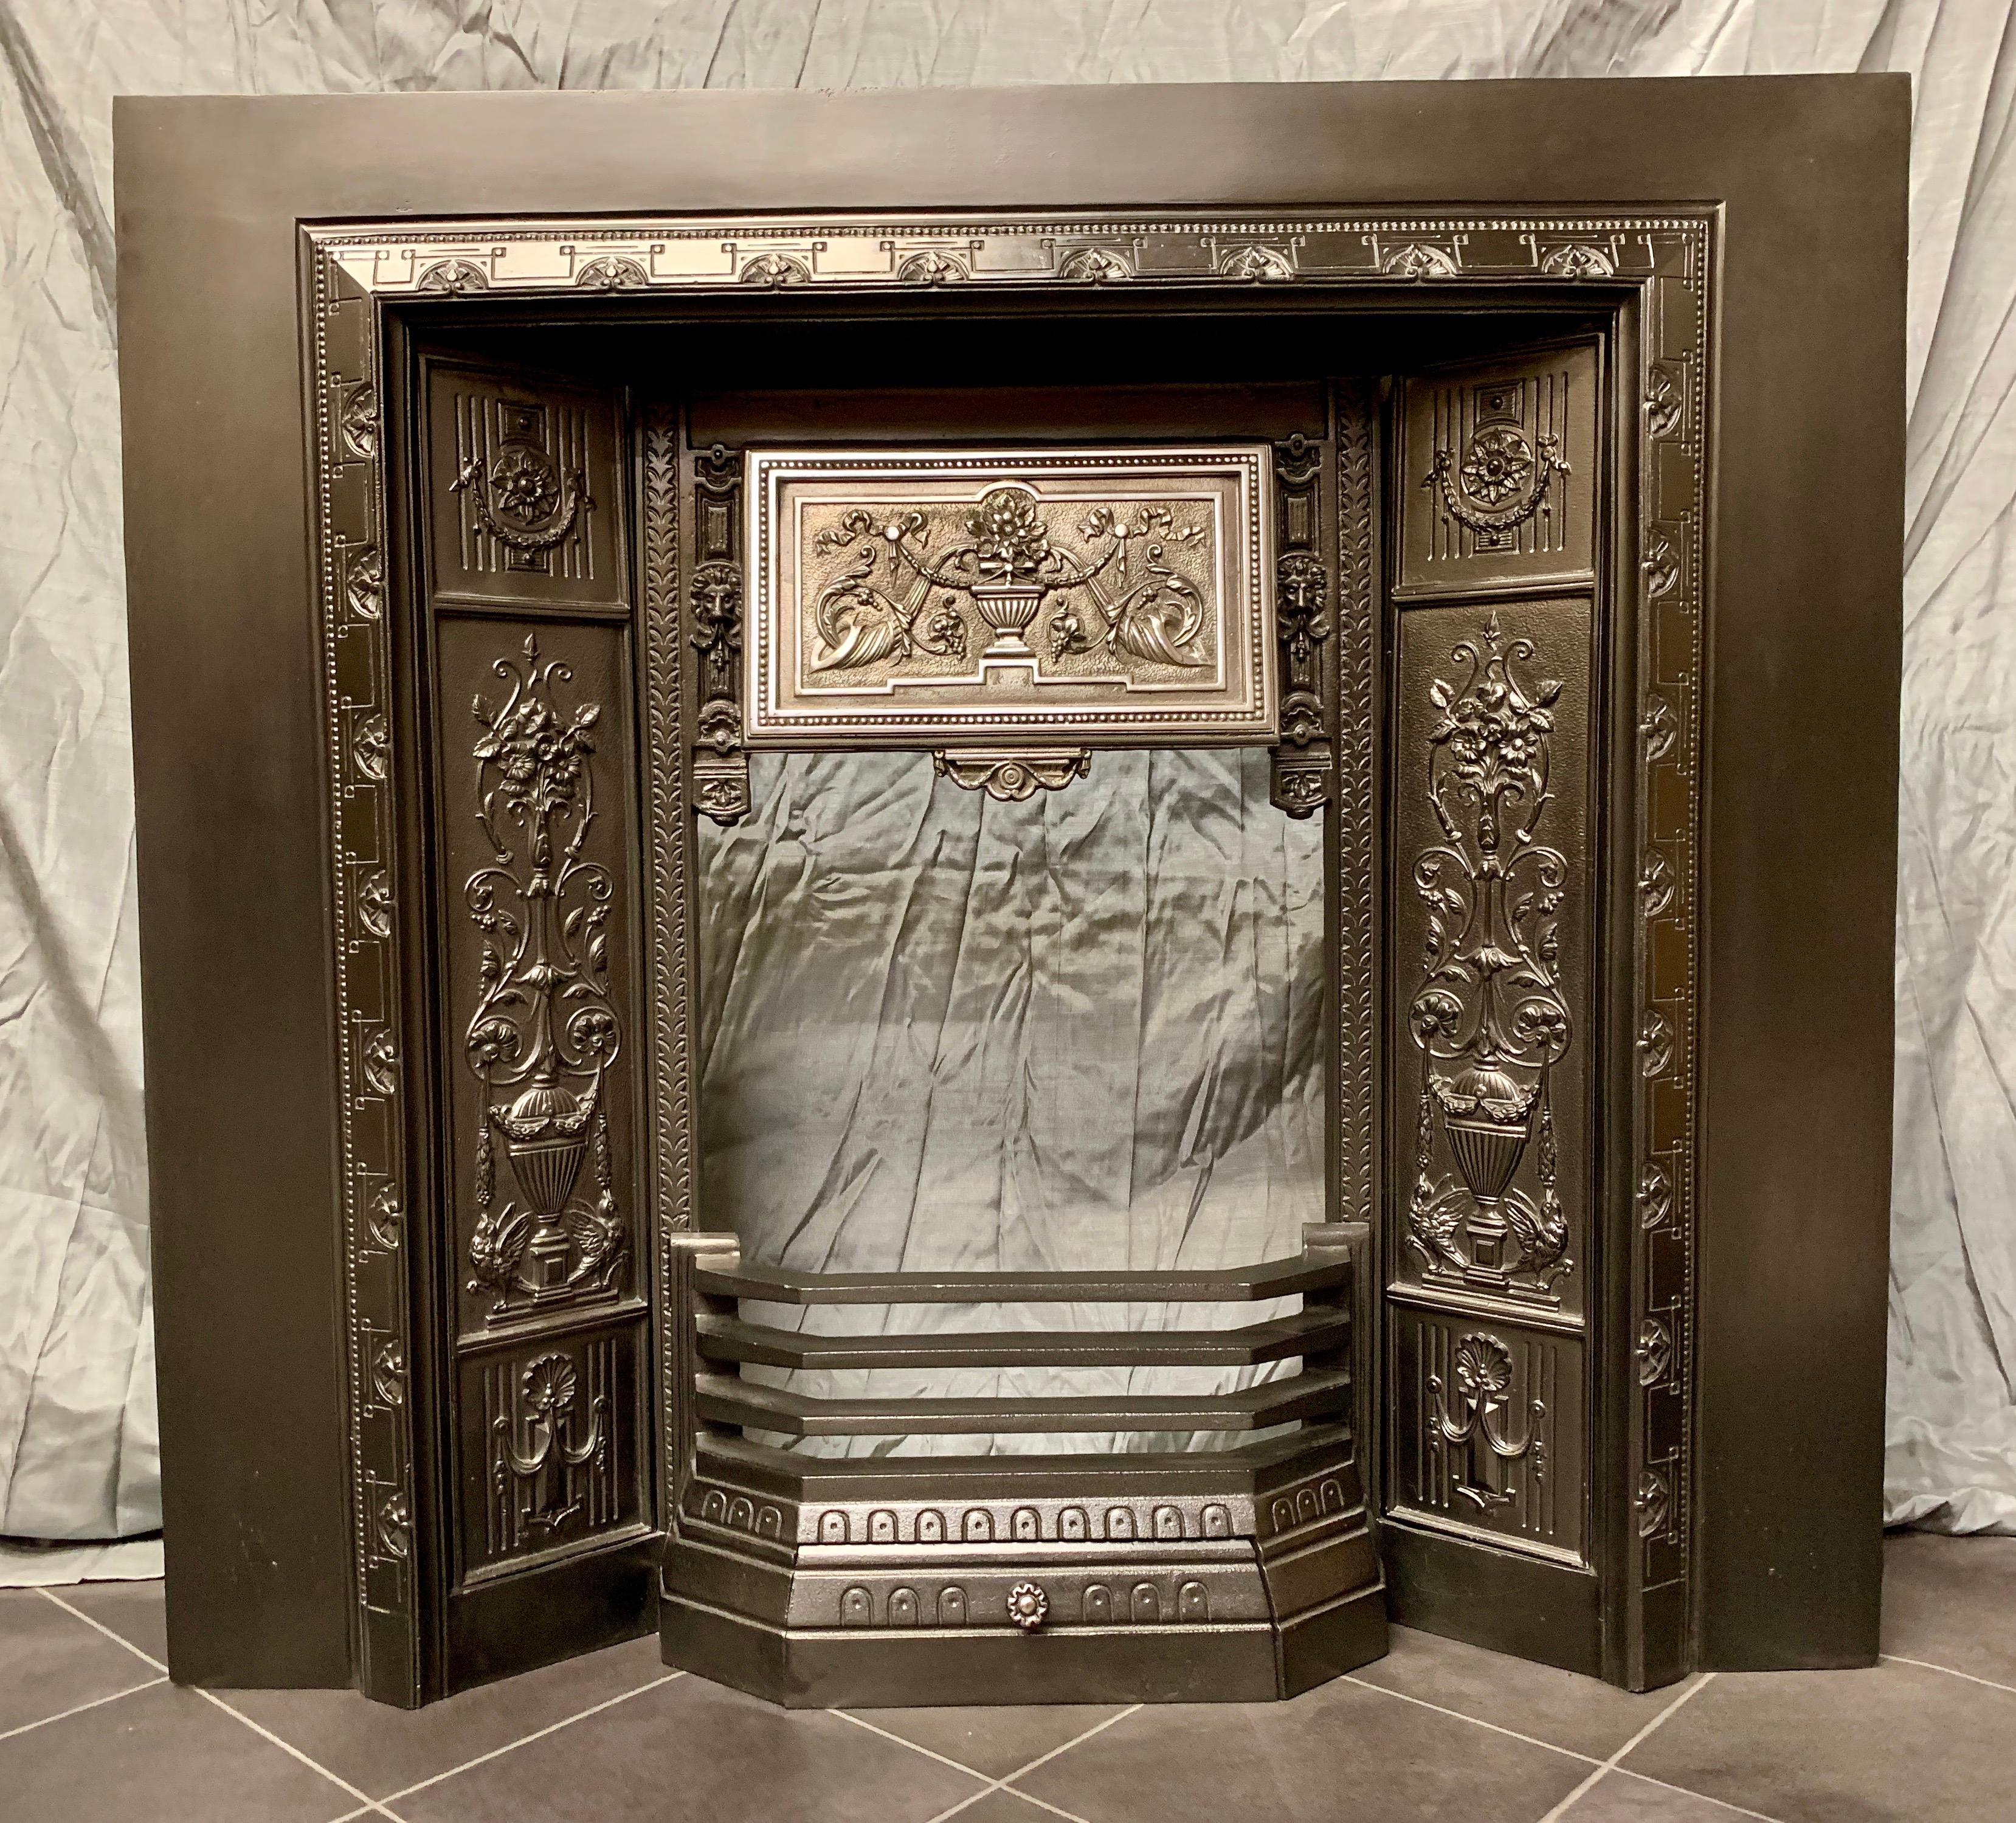 A charming and ornate 19th century Victorian cast iron fireplace insert with exquisitely cast side panels and a polished fire hood showing a central urn flanked by Cornucopia and bell flowers and swags. A generous sized piece that is stamped with a